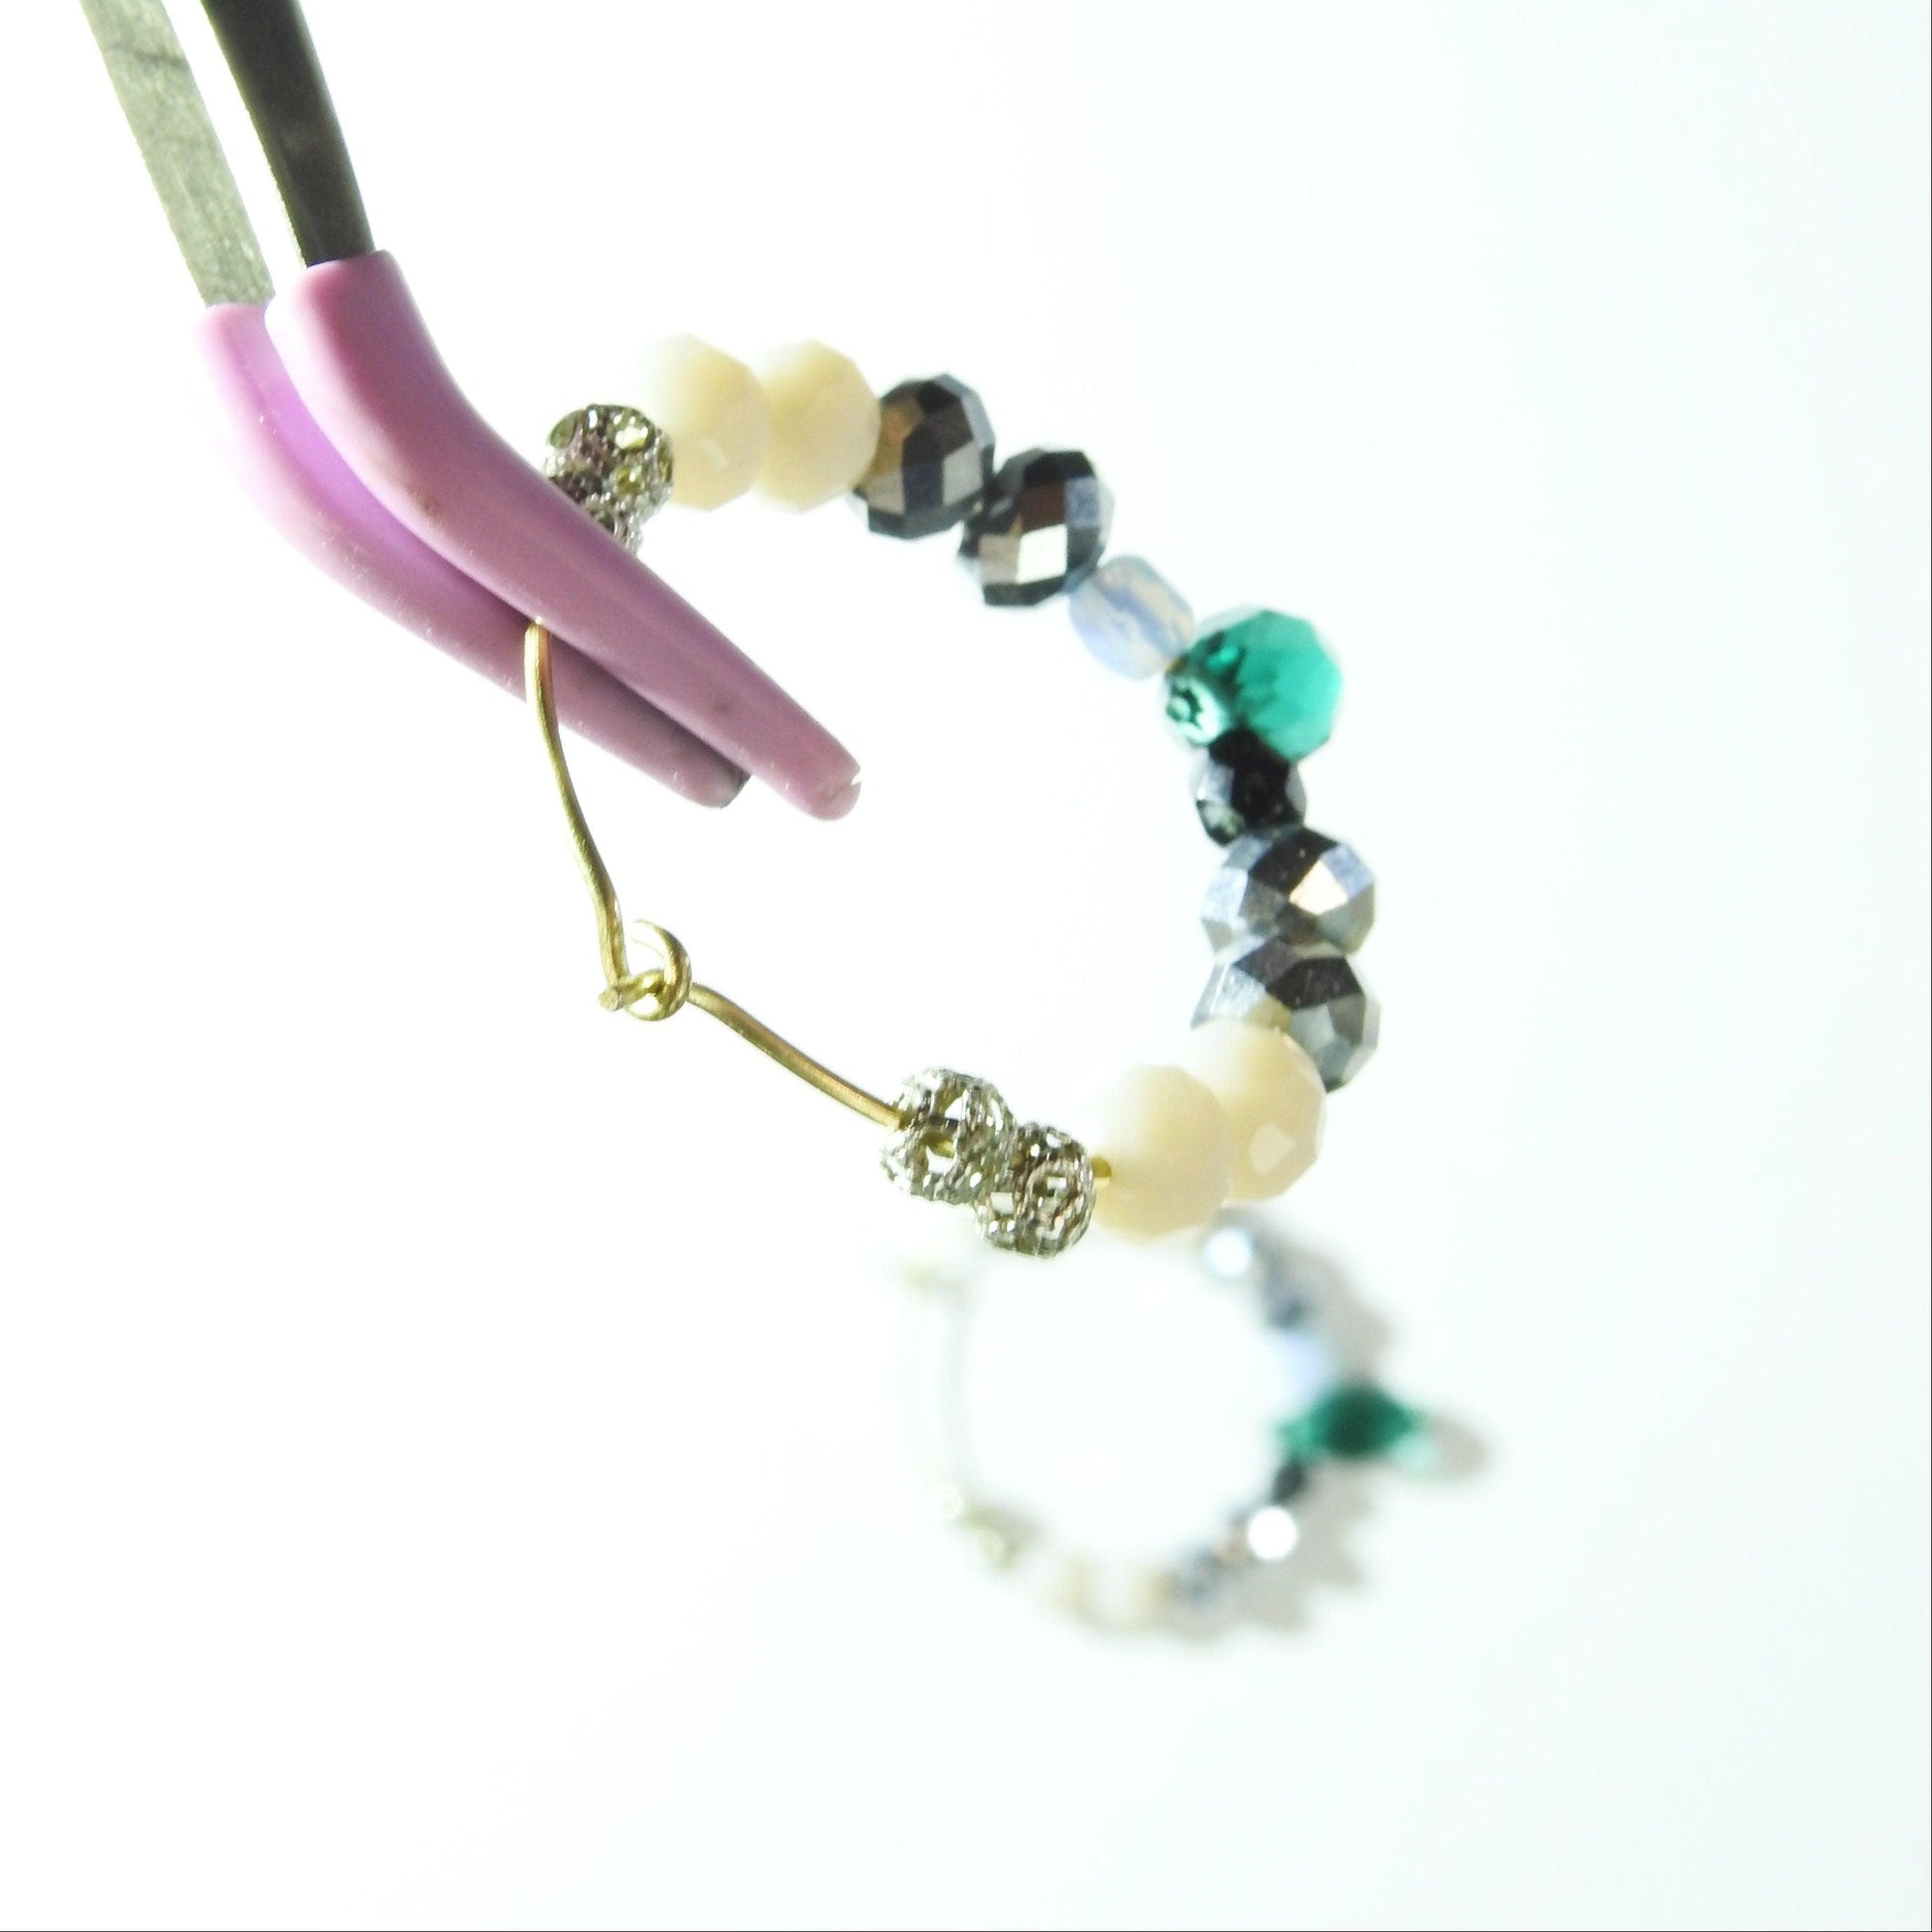 Beaded hoop earrings dangle with faceted shiny pink and grey beads and two cute dangly dark green glass teardrops. 30 mm | 1.5''